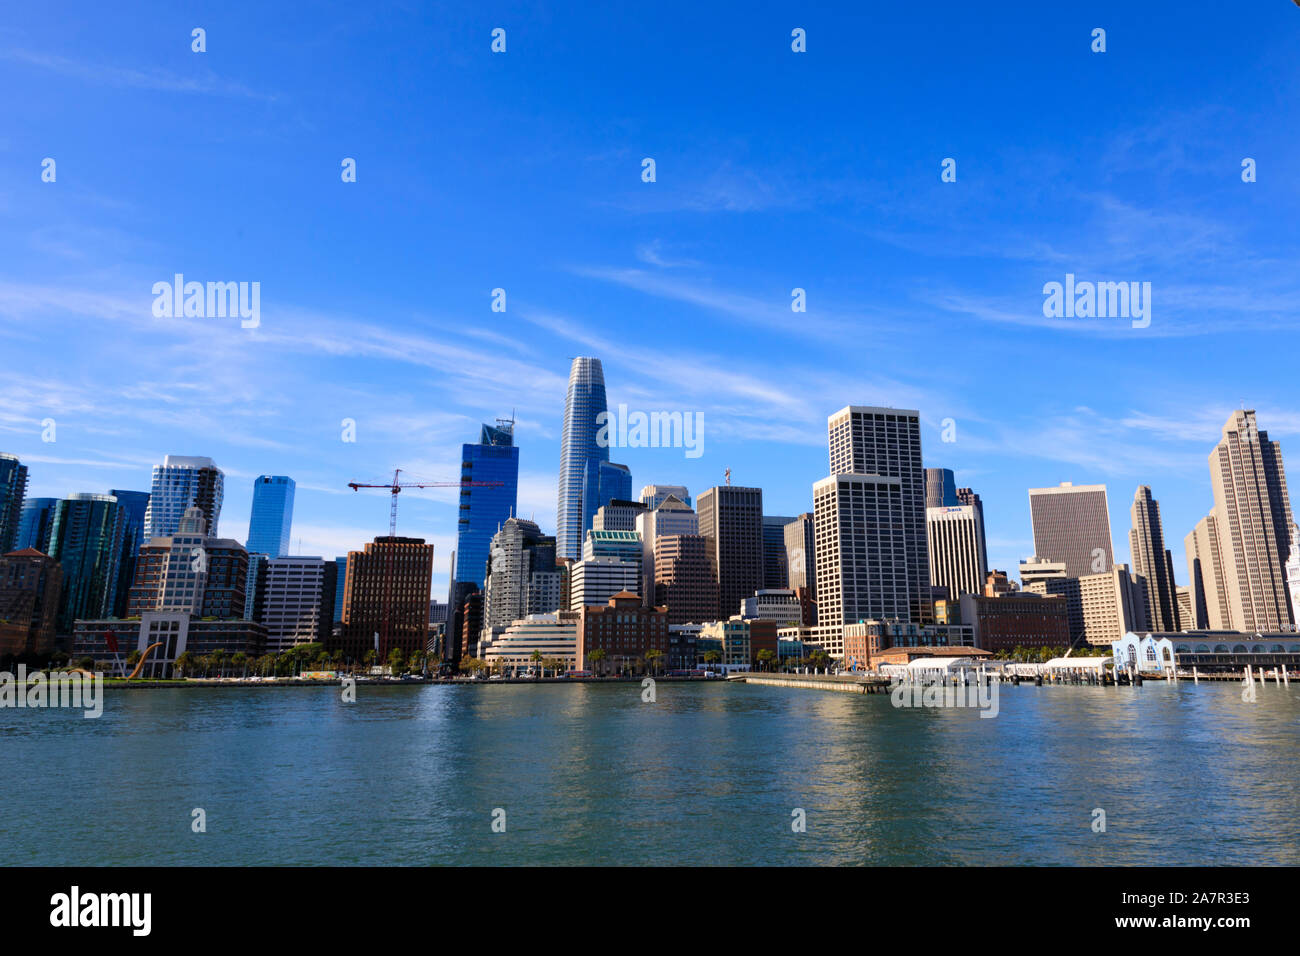 San Francisco skyline with skyscrapers, California, United States of America Stock Photo